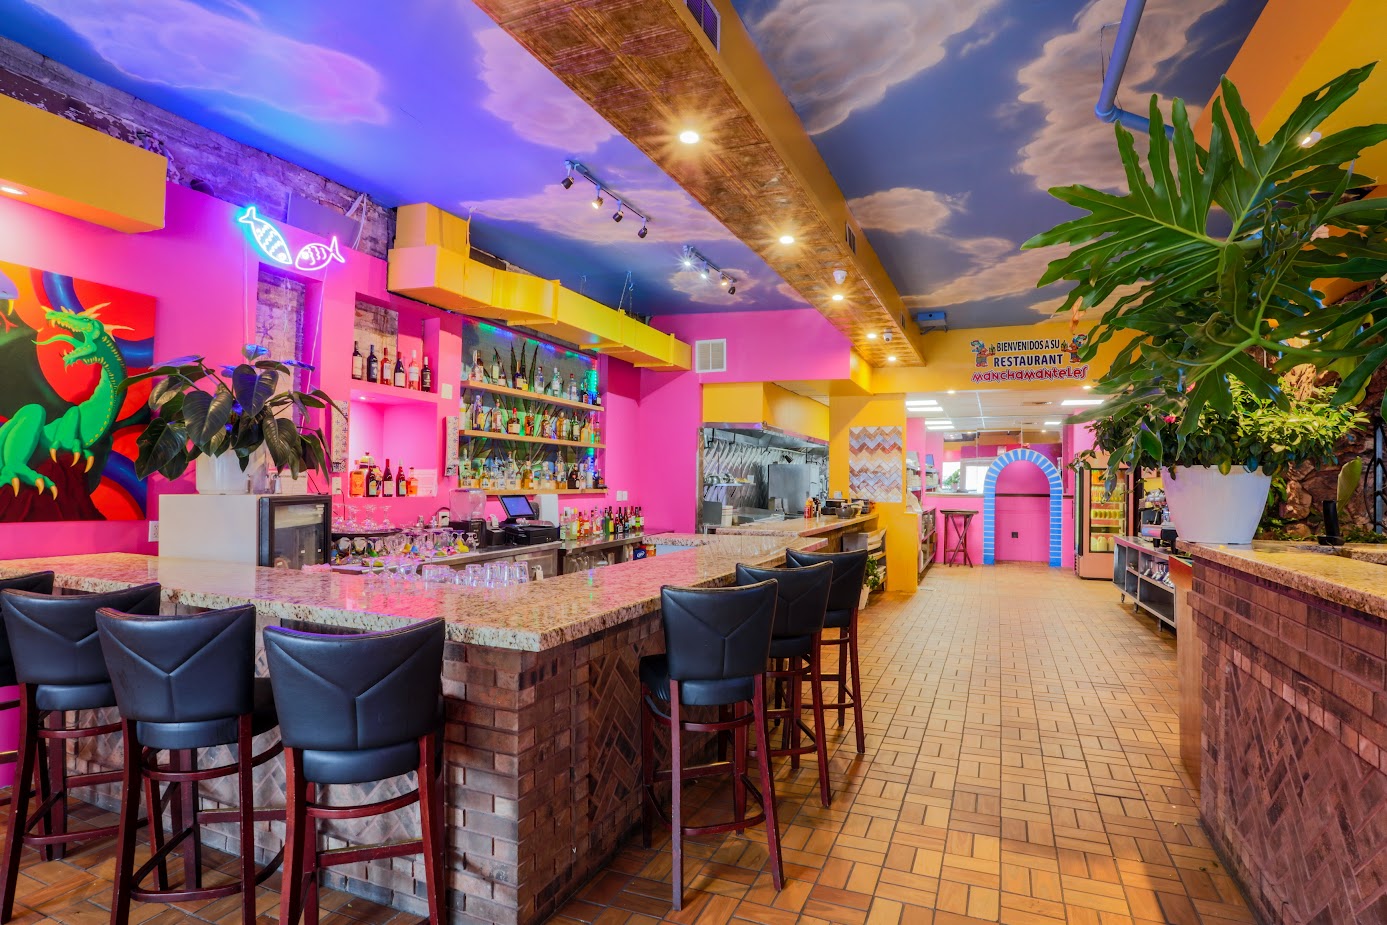 A bar section of a restaurant with bright pink and yellow walls.